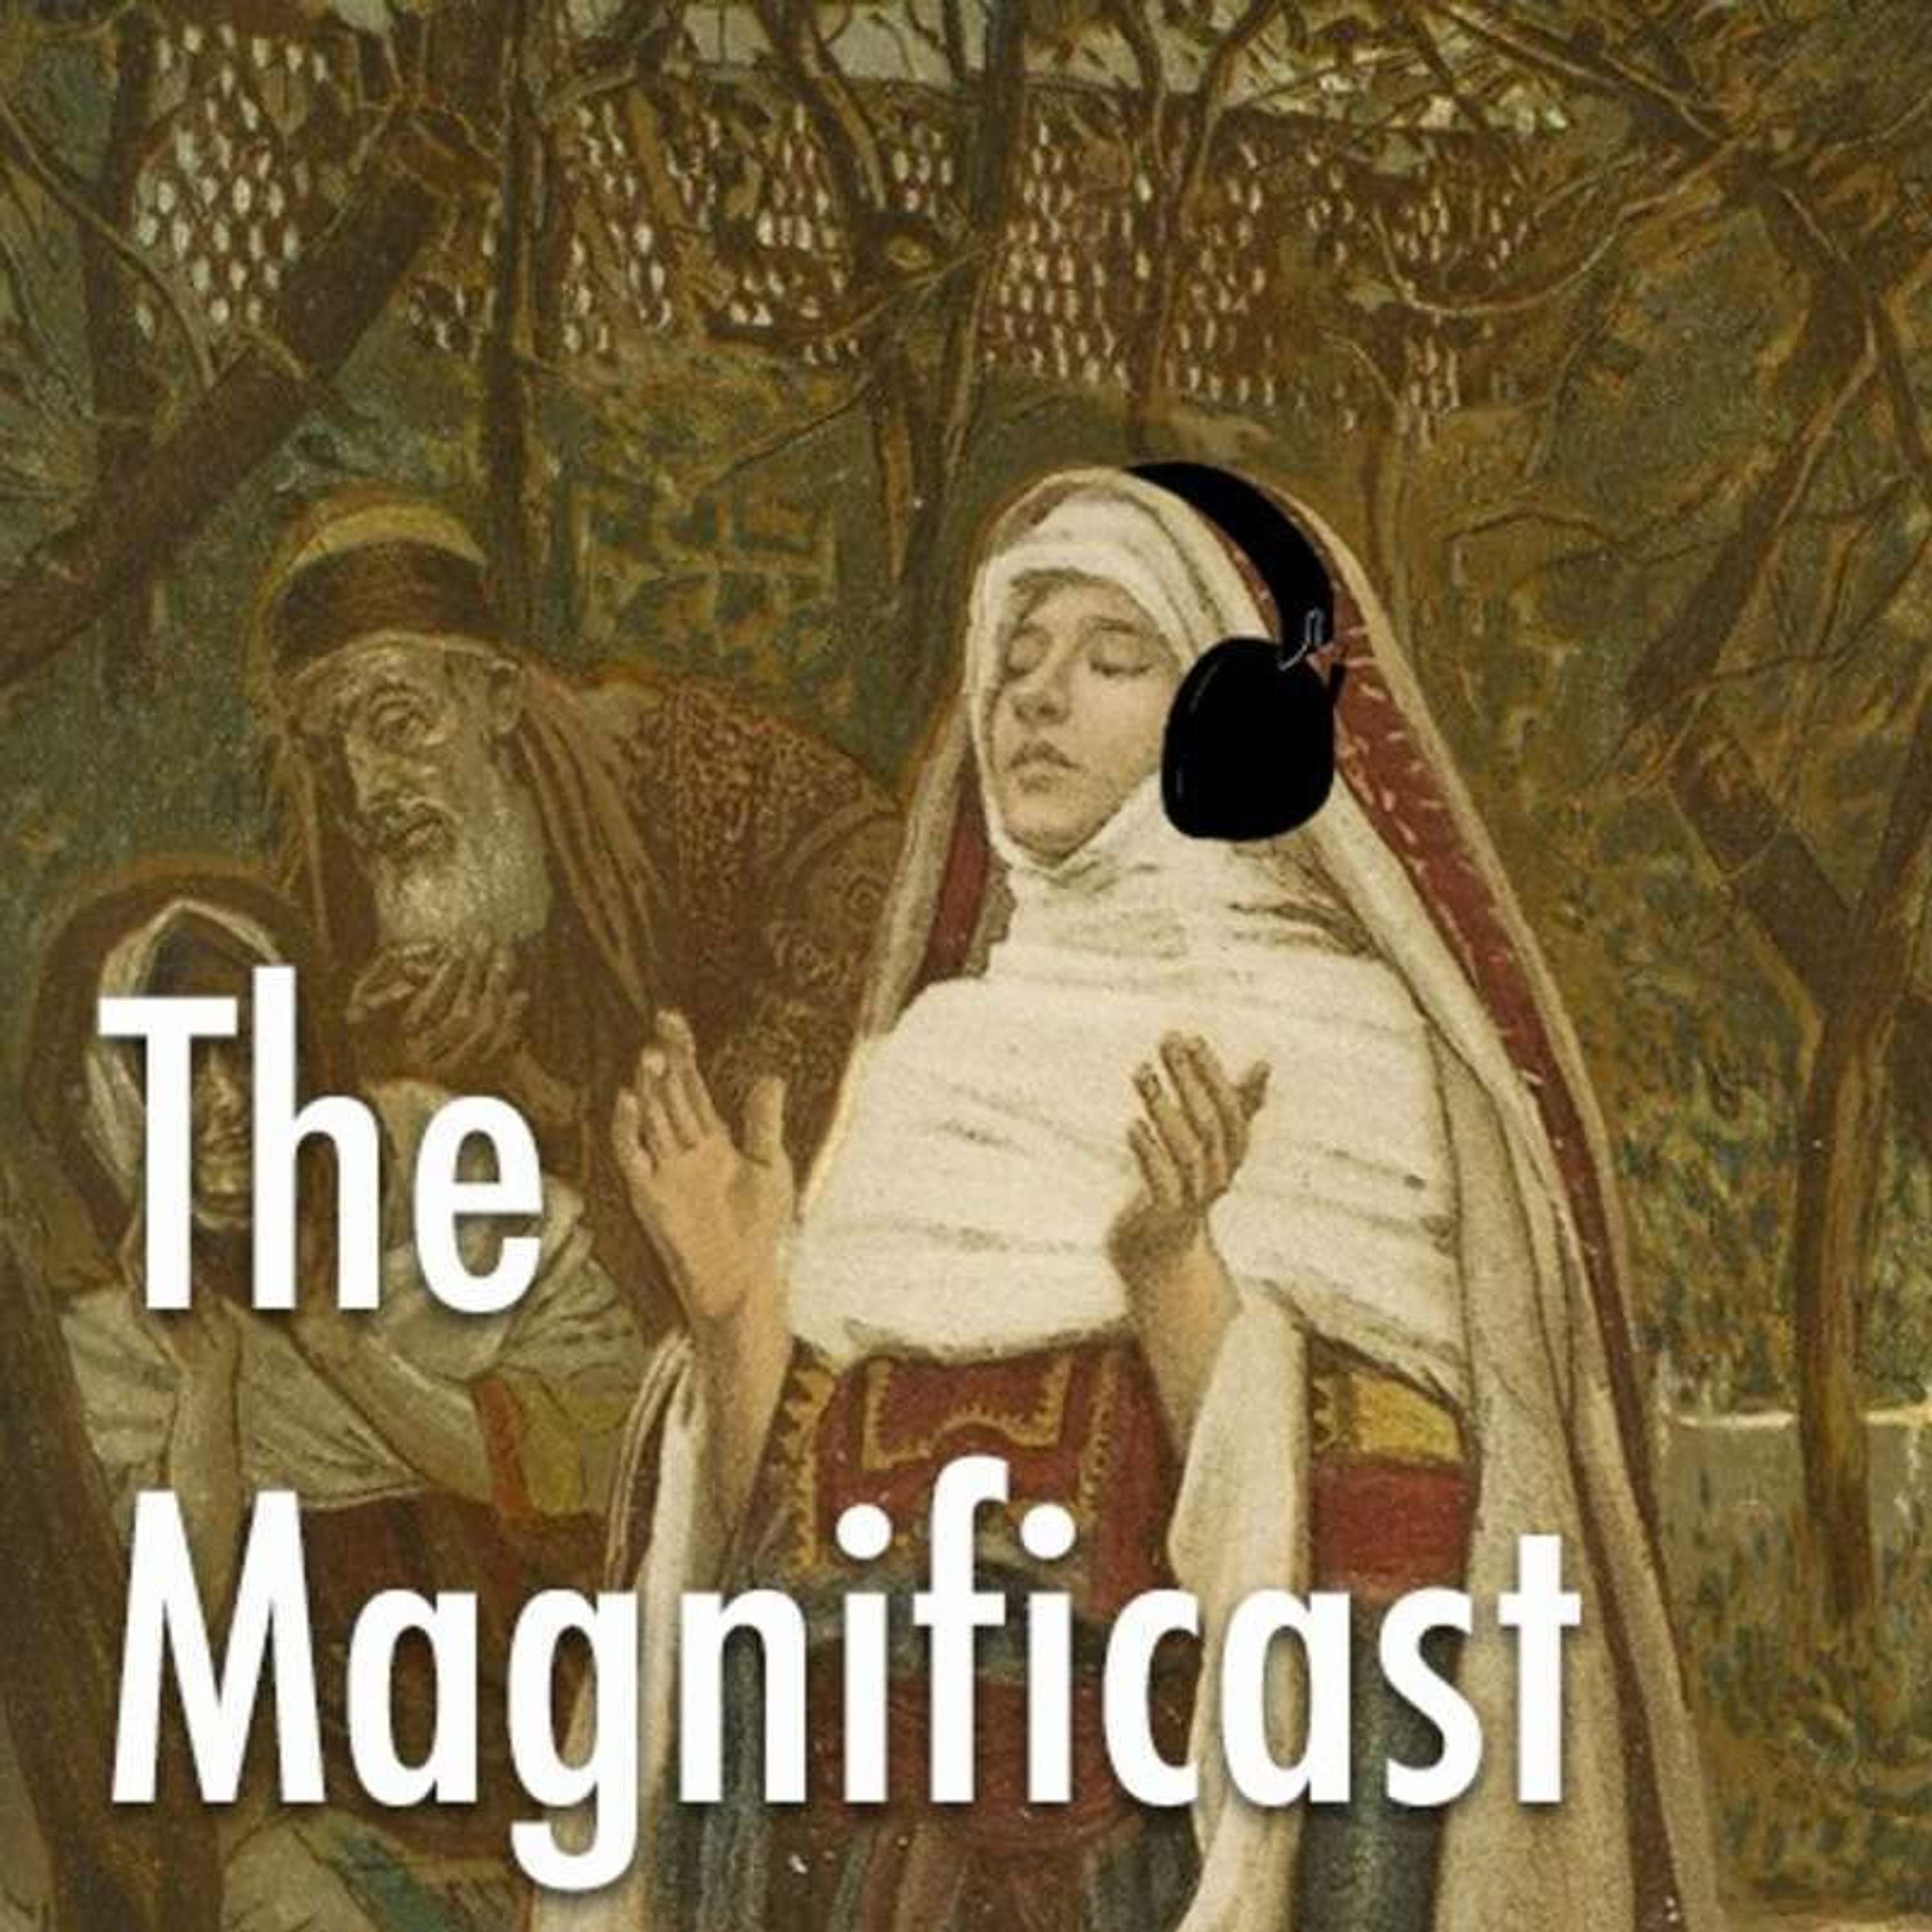 Magnificast Classic: The Rich Man and Lazarus